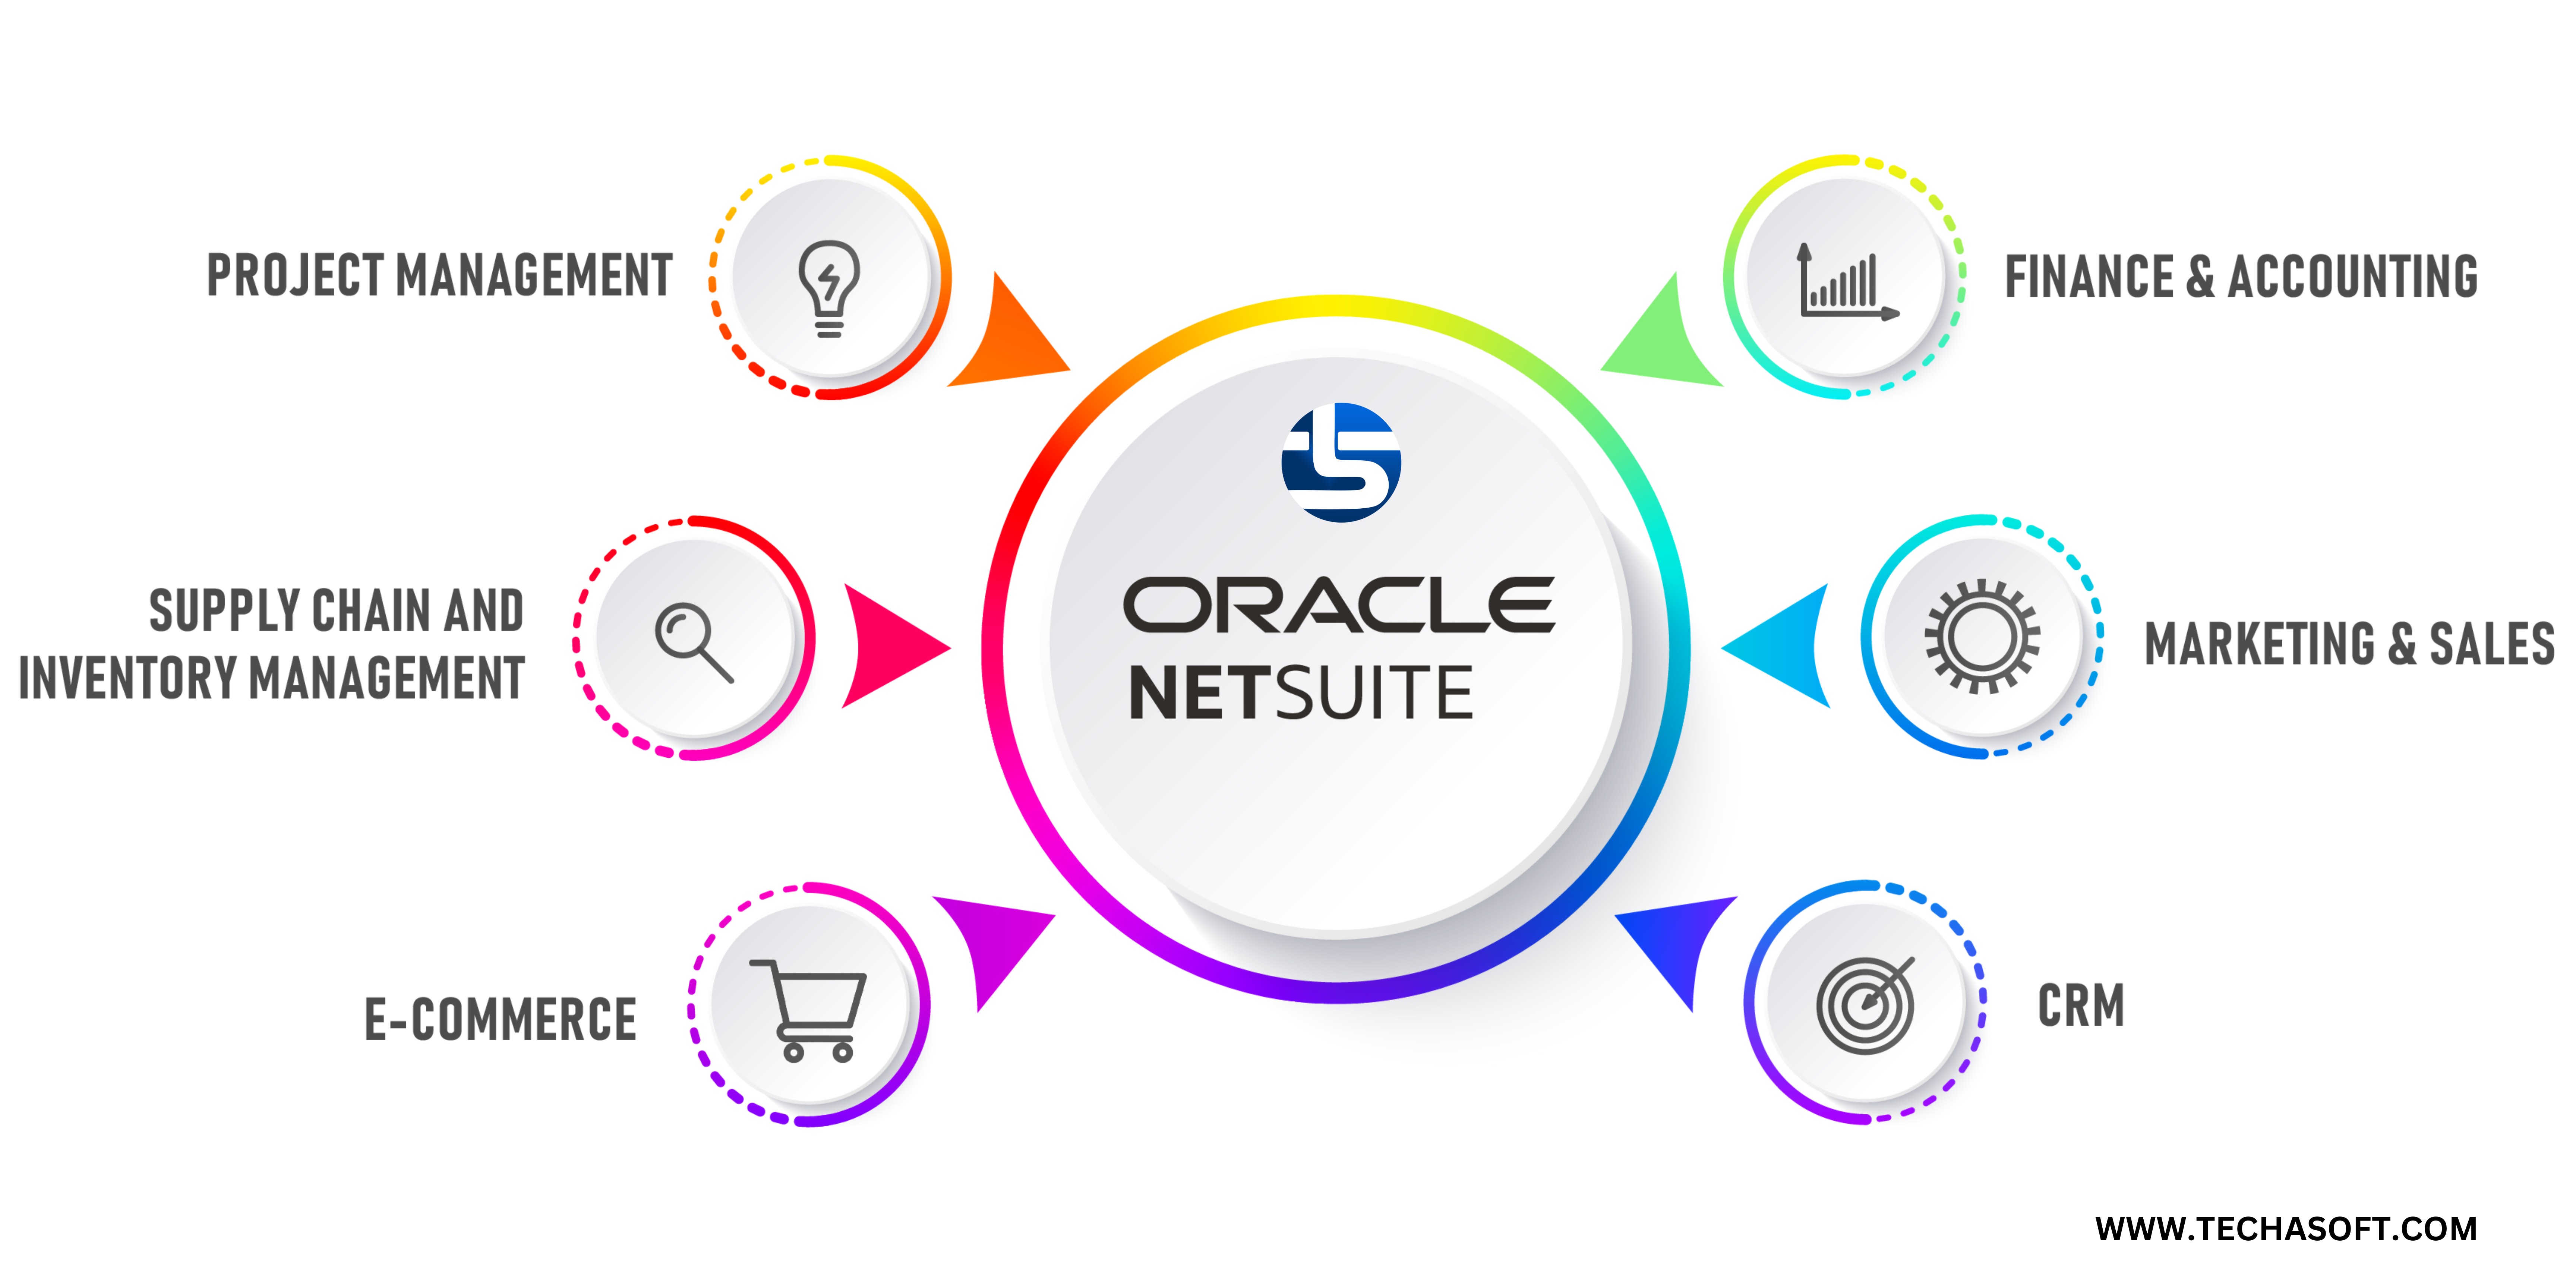 Oracle NetSuite Cloud ERP Solution Overview